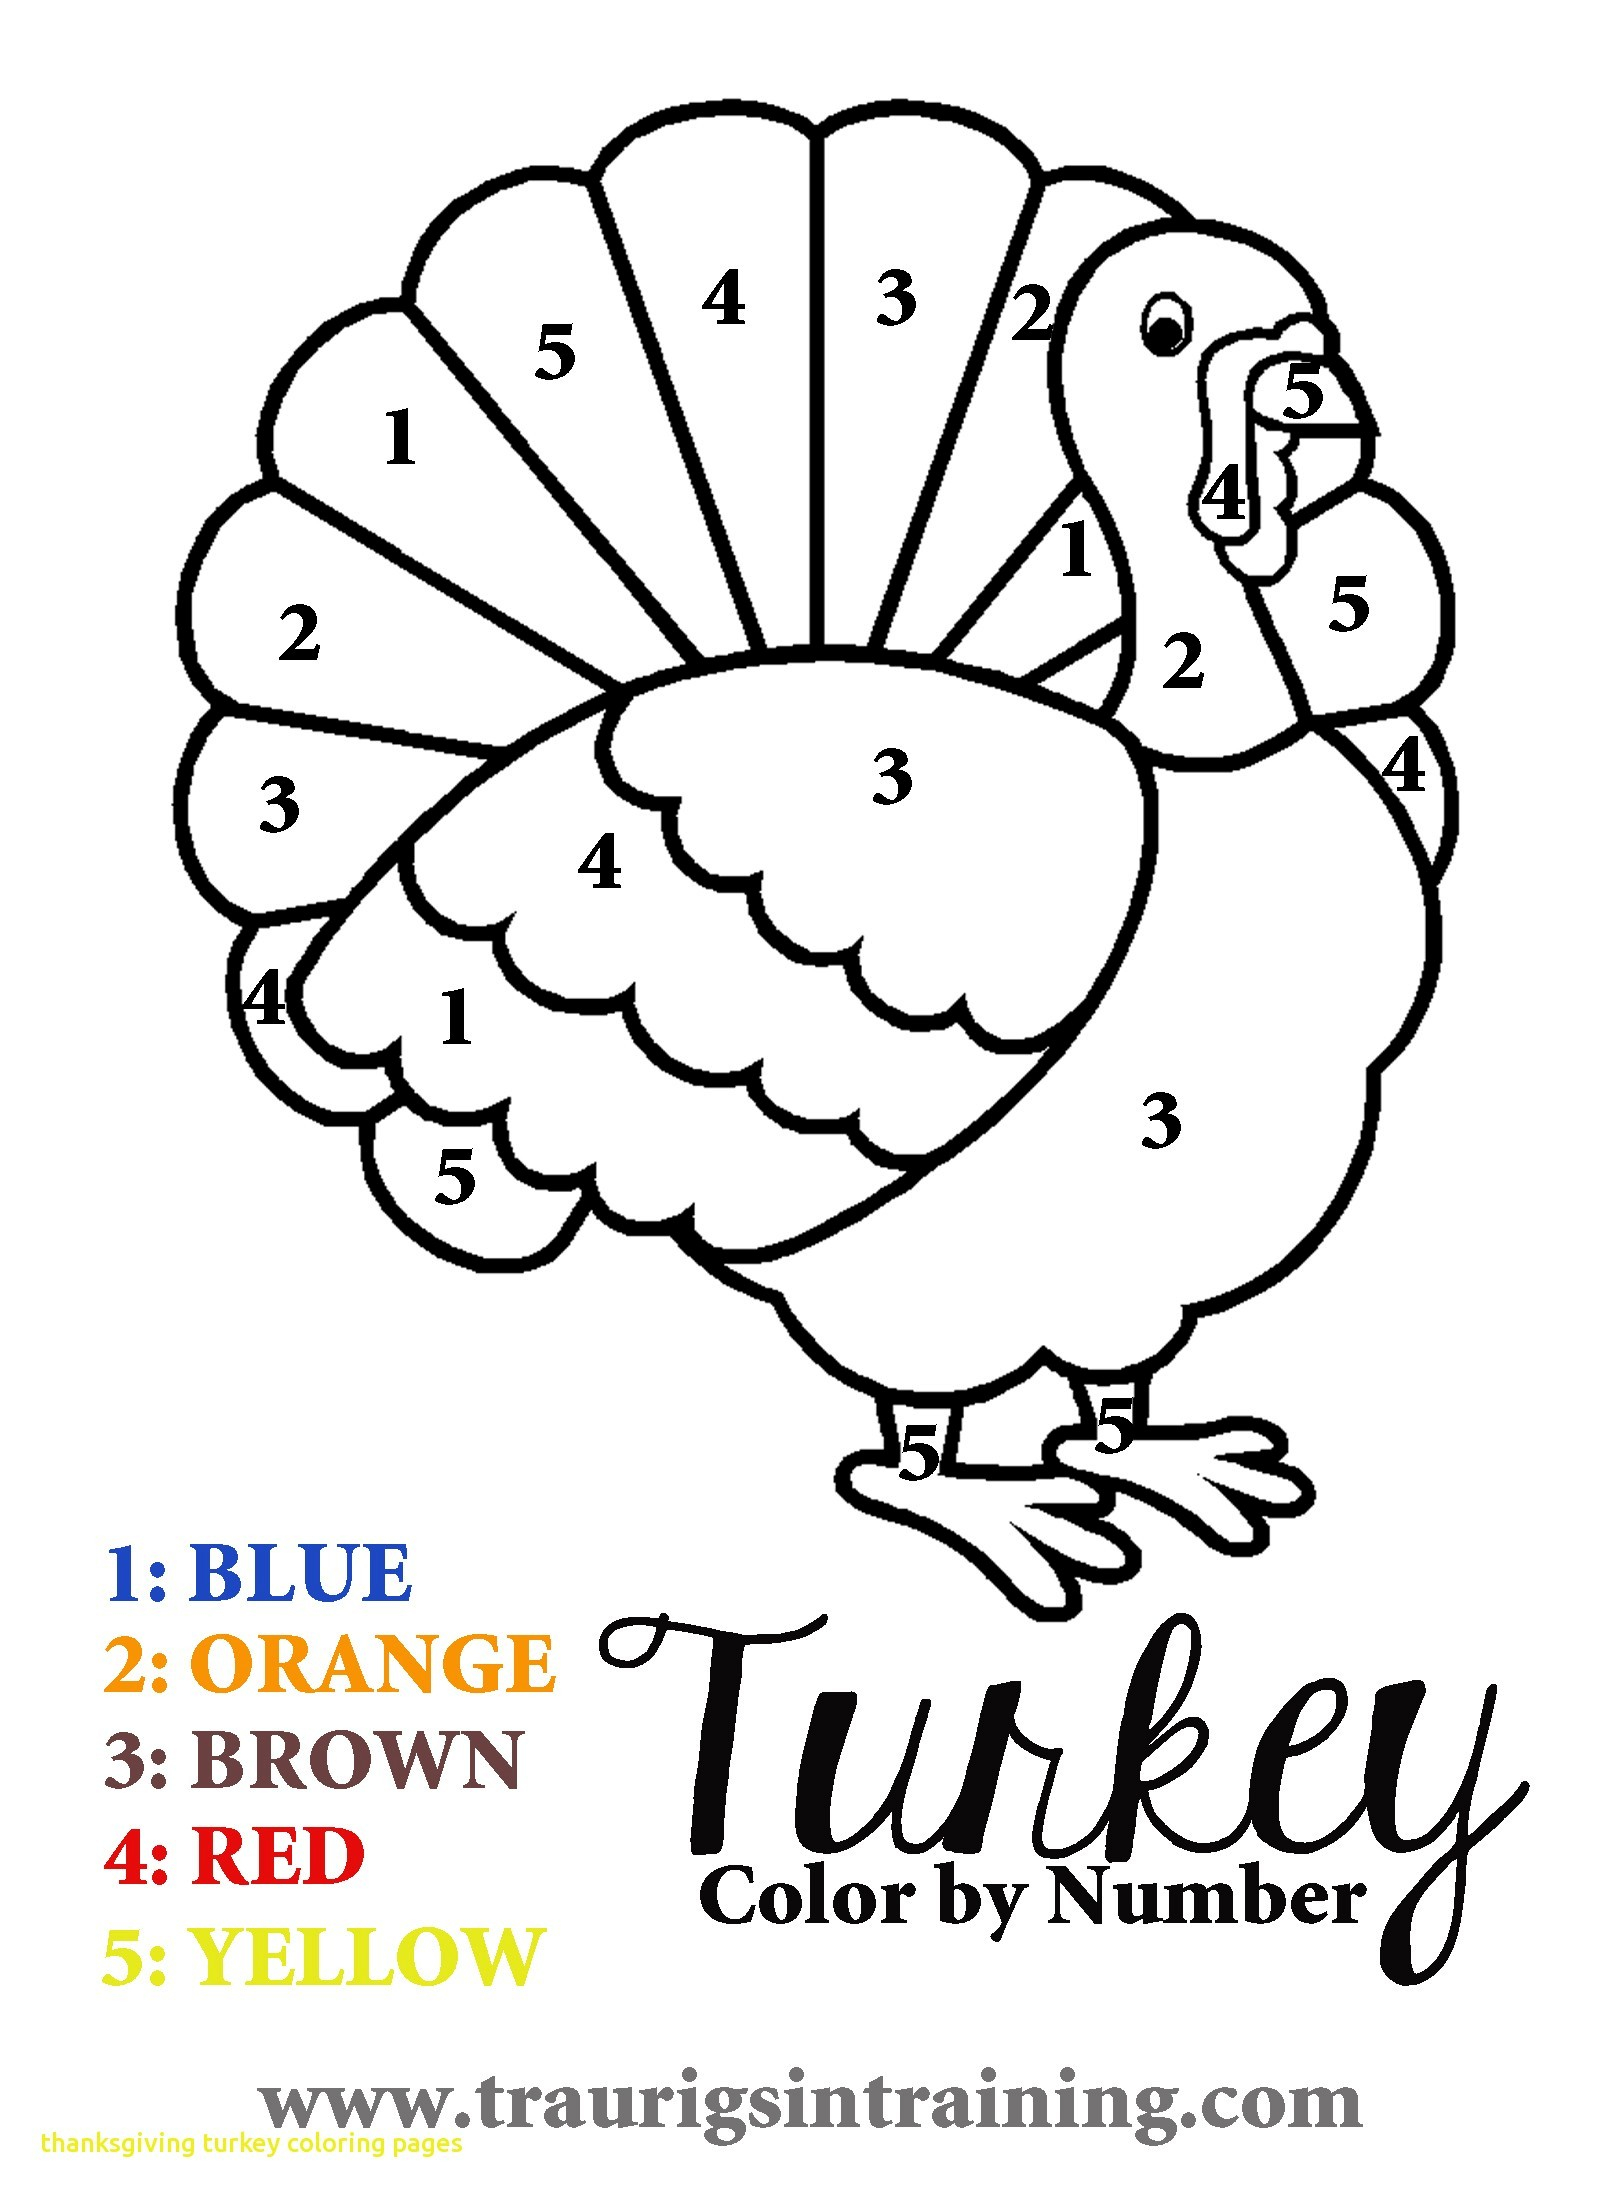 Preschool Turkey Coloring Pages Coloring Free Preschool Coloring Pages Fresh Turkey For